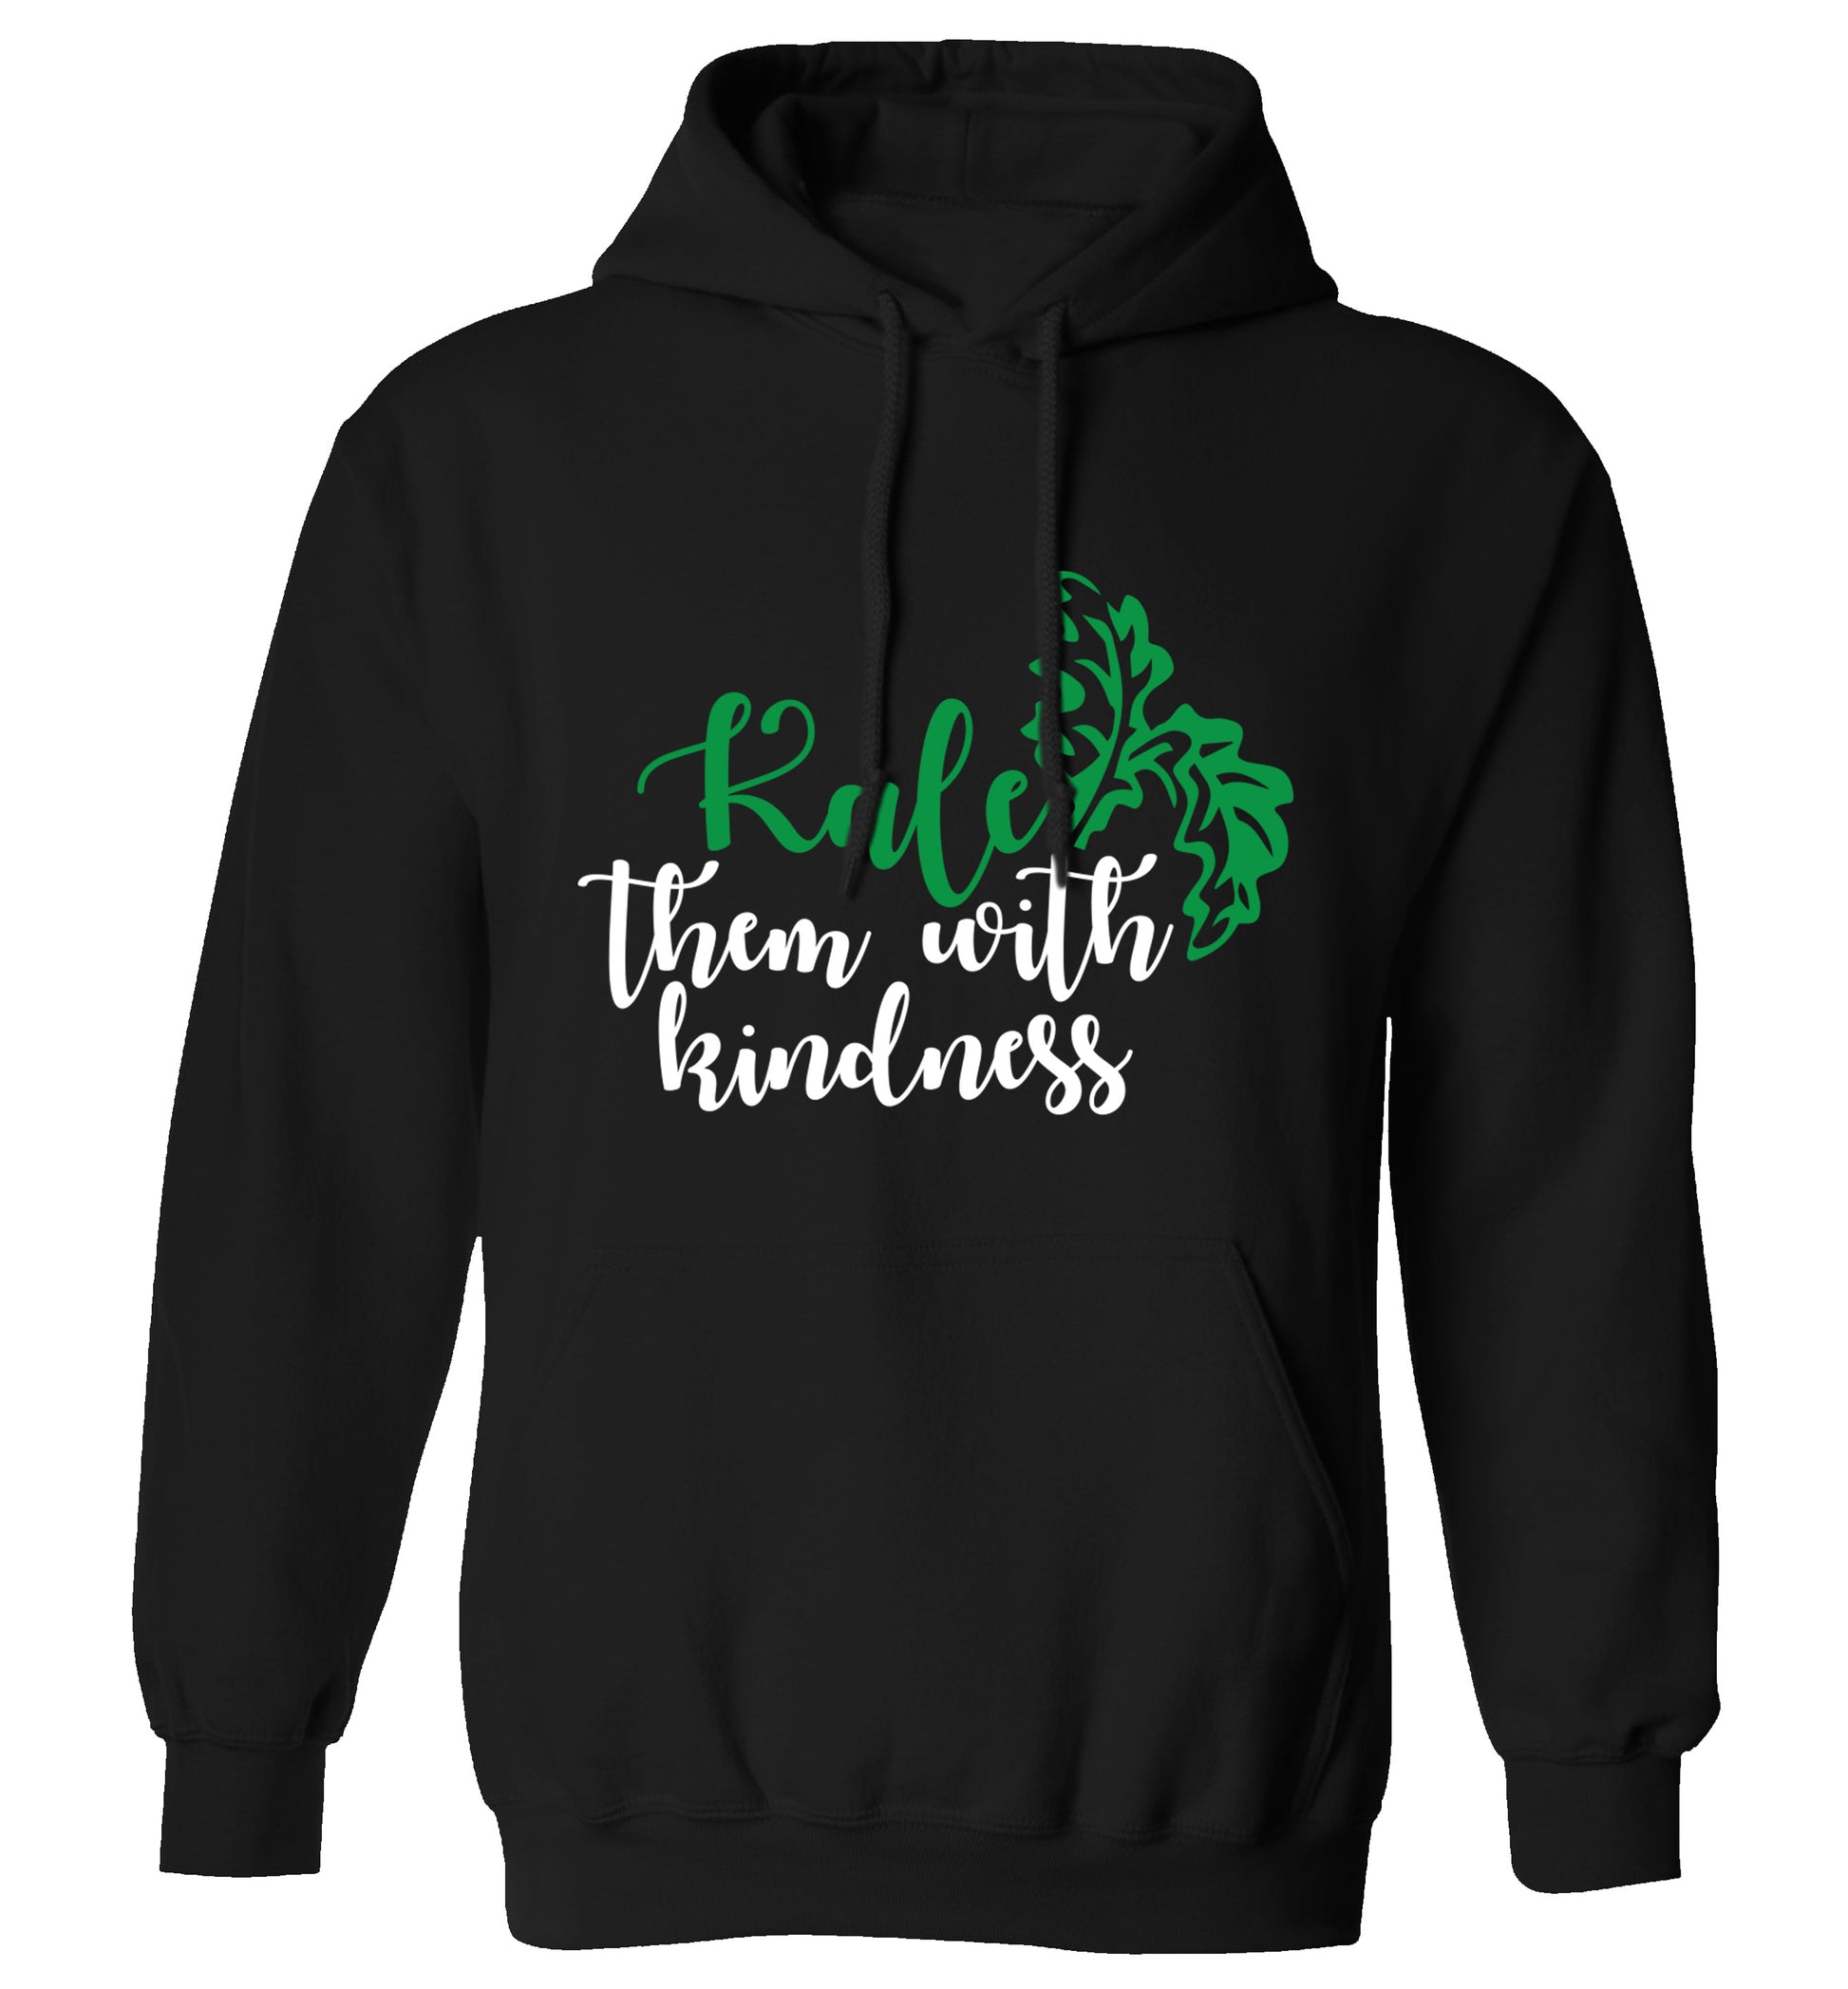 Kale them with kindness adults unisex black hoodie 2XL